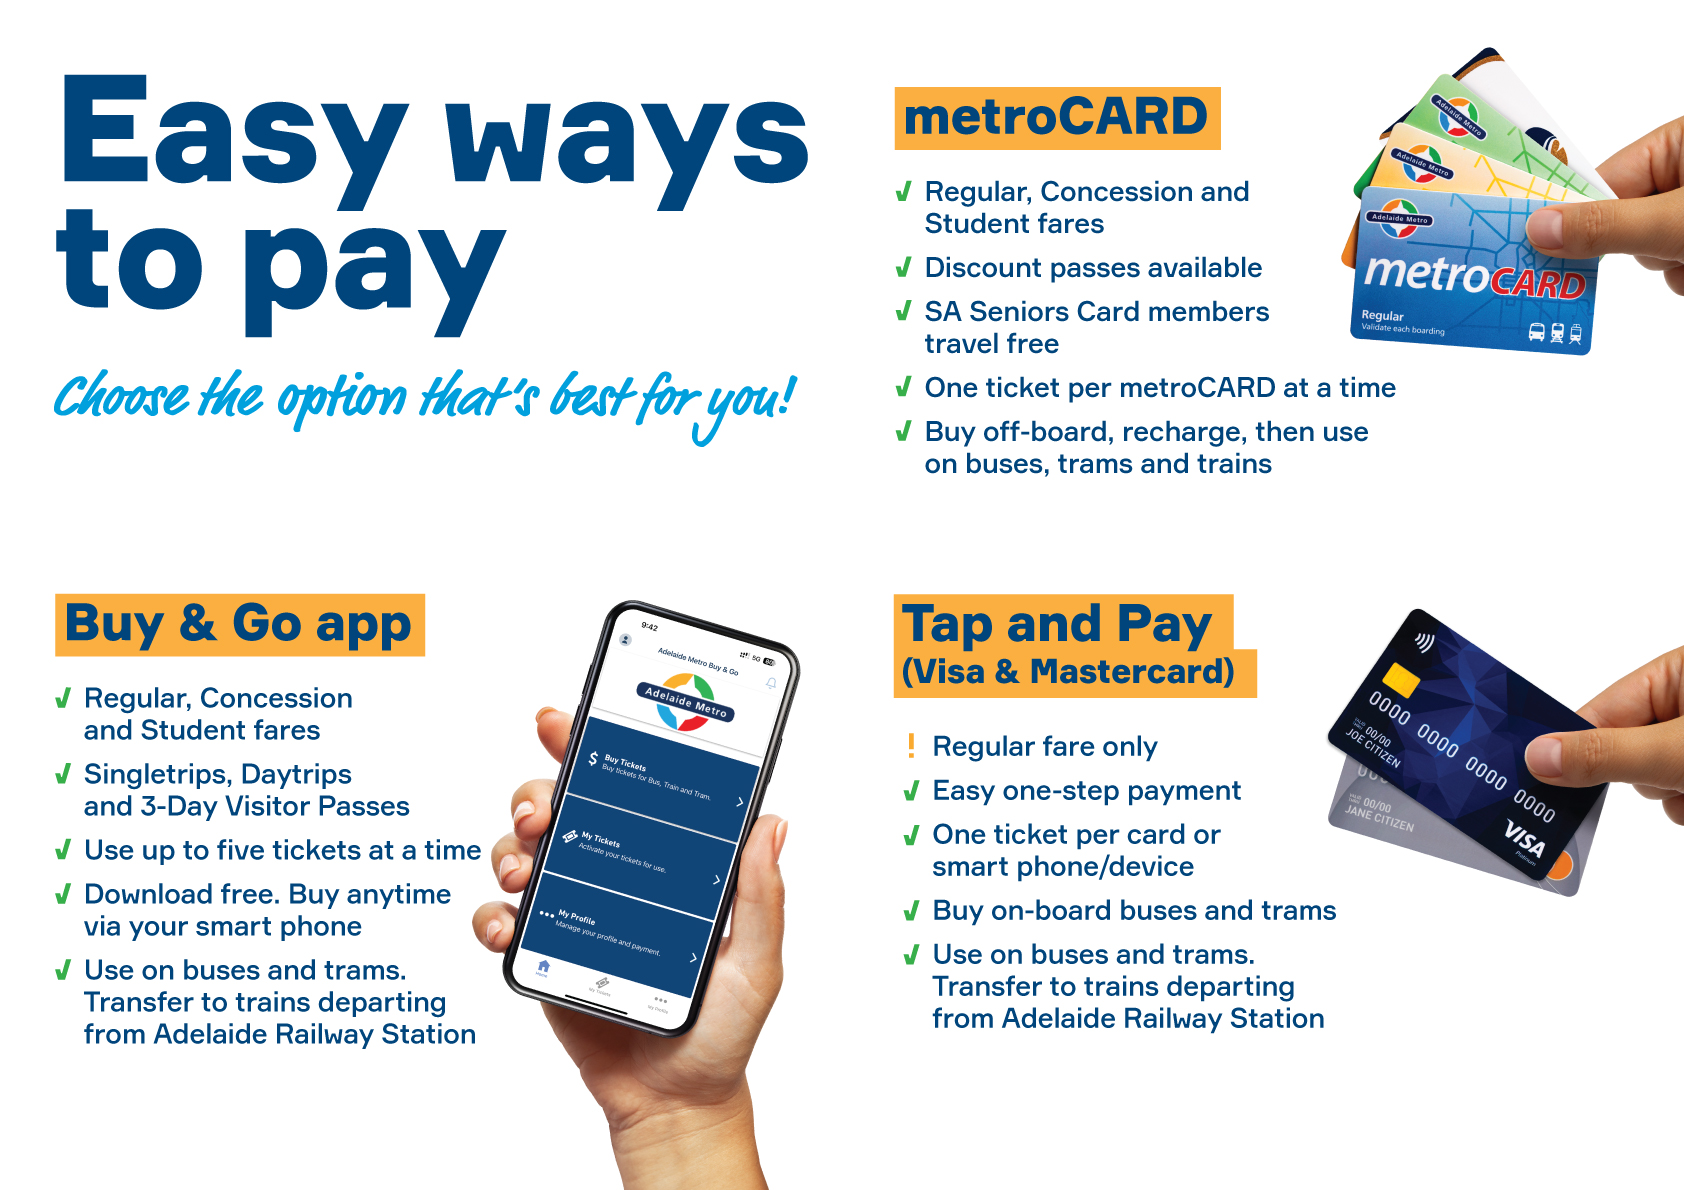 Poster: Easy ways to pay on buses, with metroCARD options, Tap and Pay and the Buy & Go app.